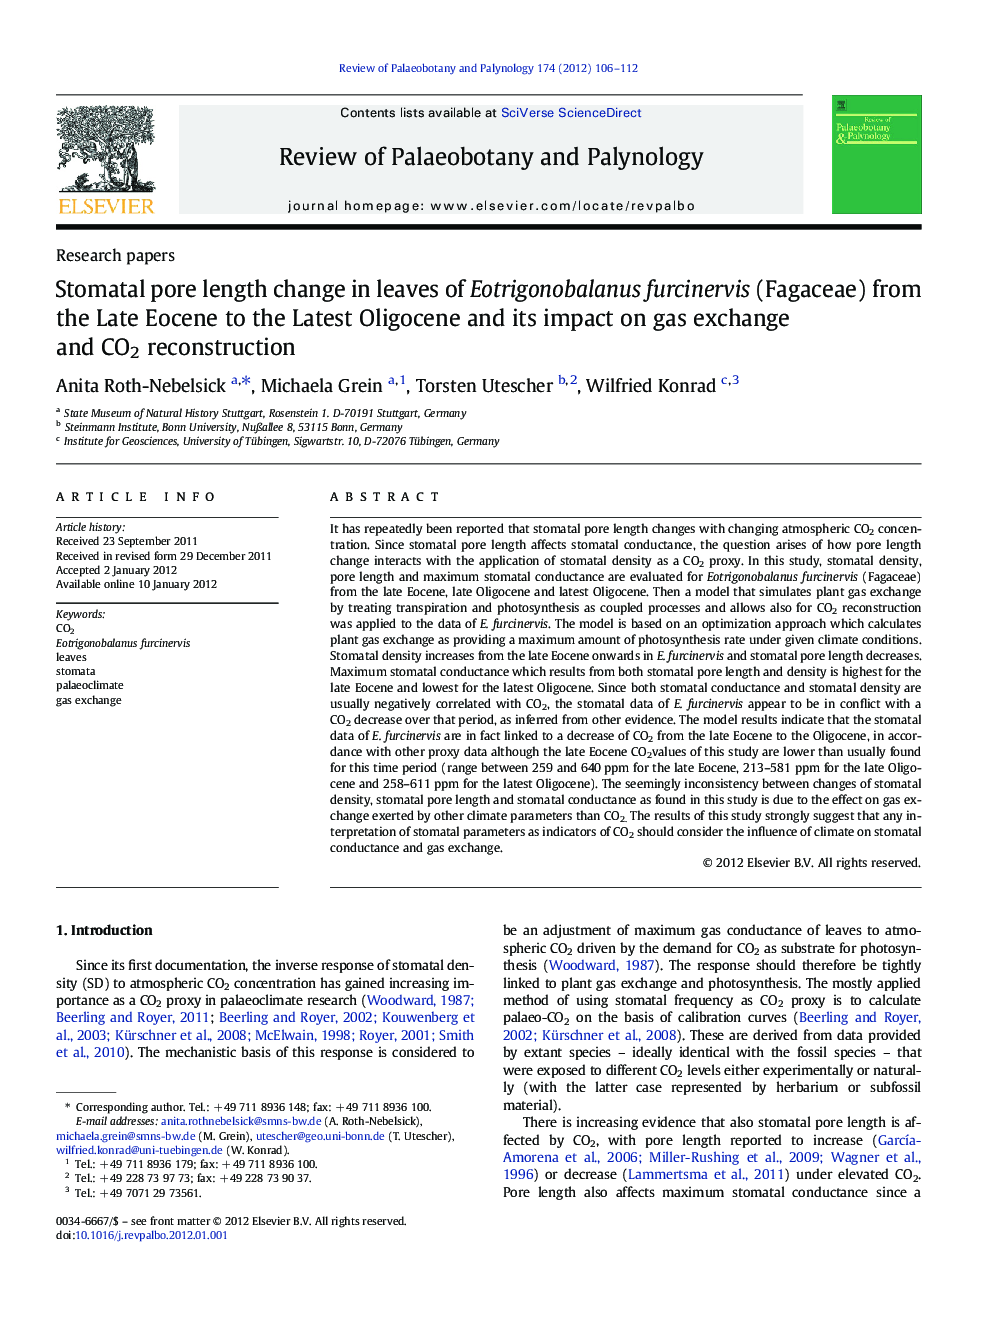 Stomatal pore length change in leaves of Eotrigonobalanus furcinervis (Fagaceae) from the Late Eocene to the Latest Oligocene and its impact on gas exchange and CO2 reconstruction